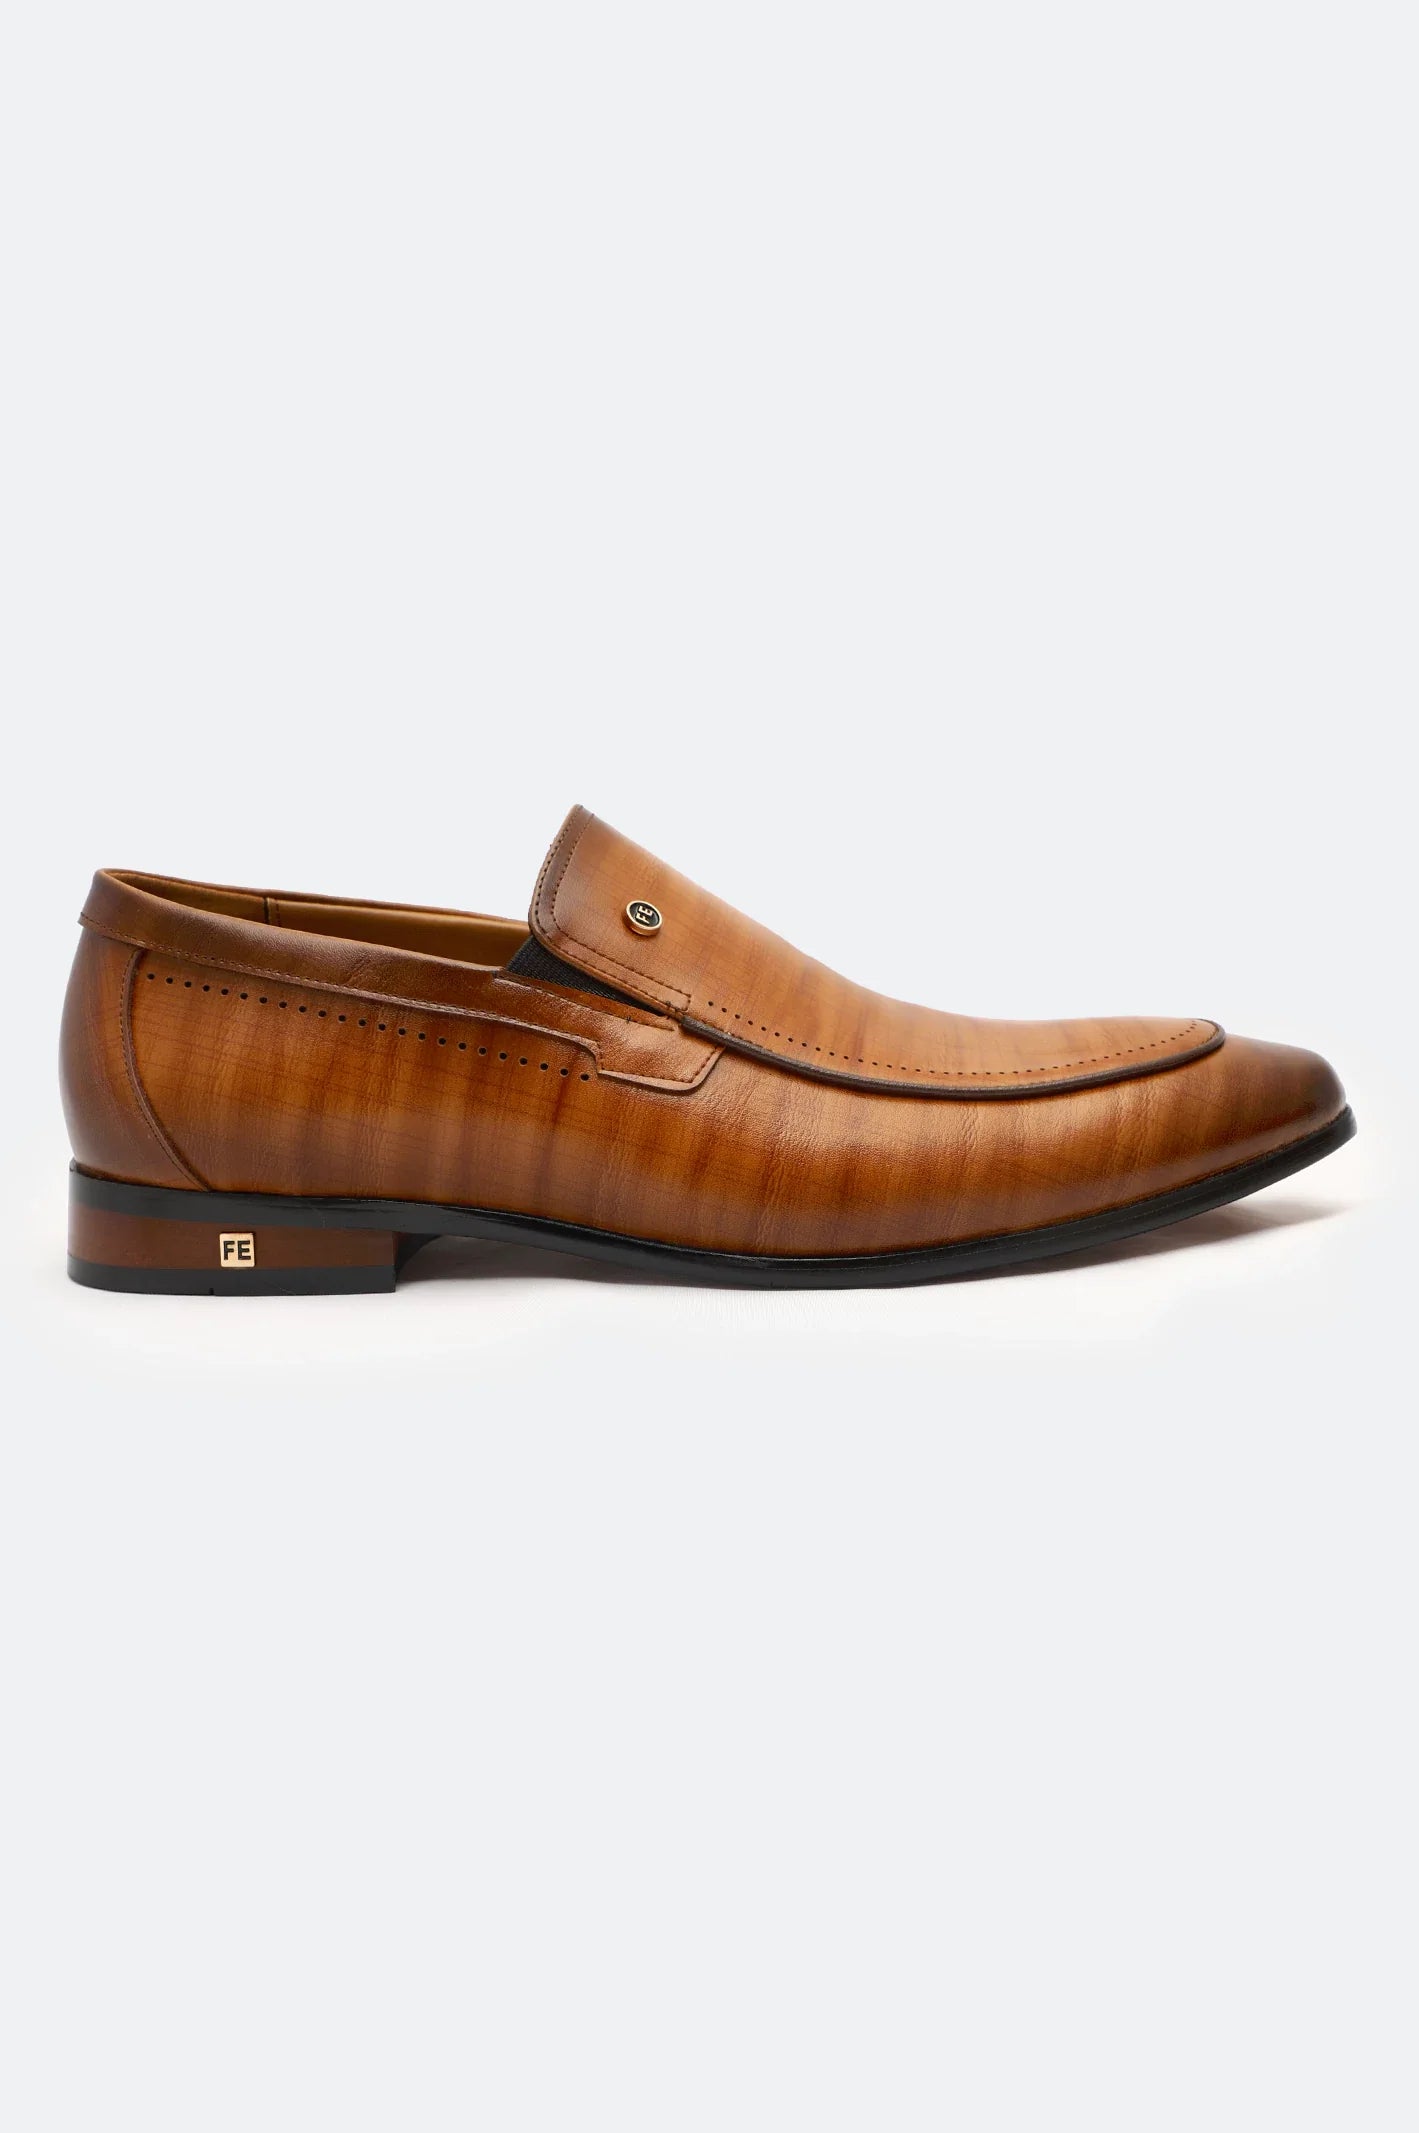 Brown Formal Mocassins Shoes Premium Shoes From French Emporio By Diners